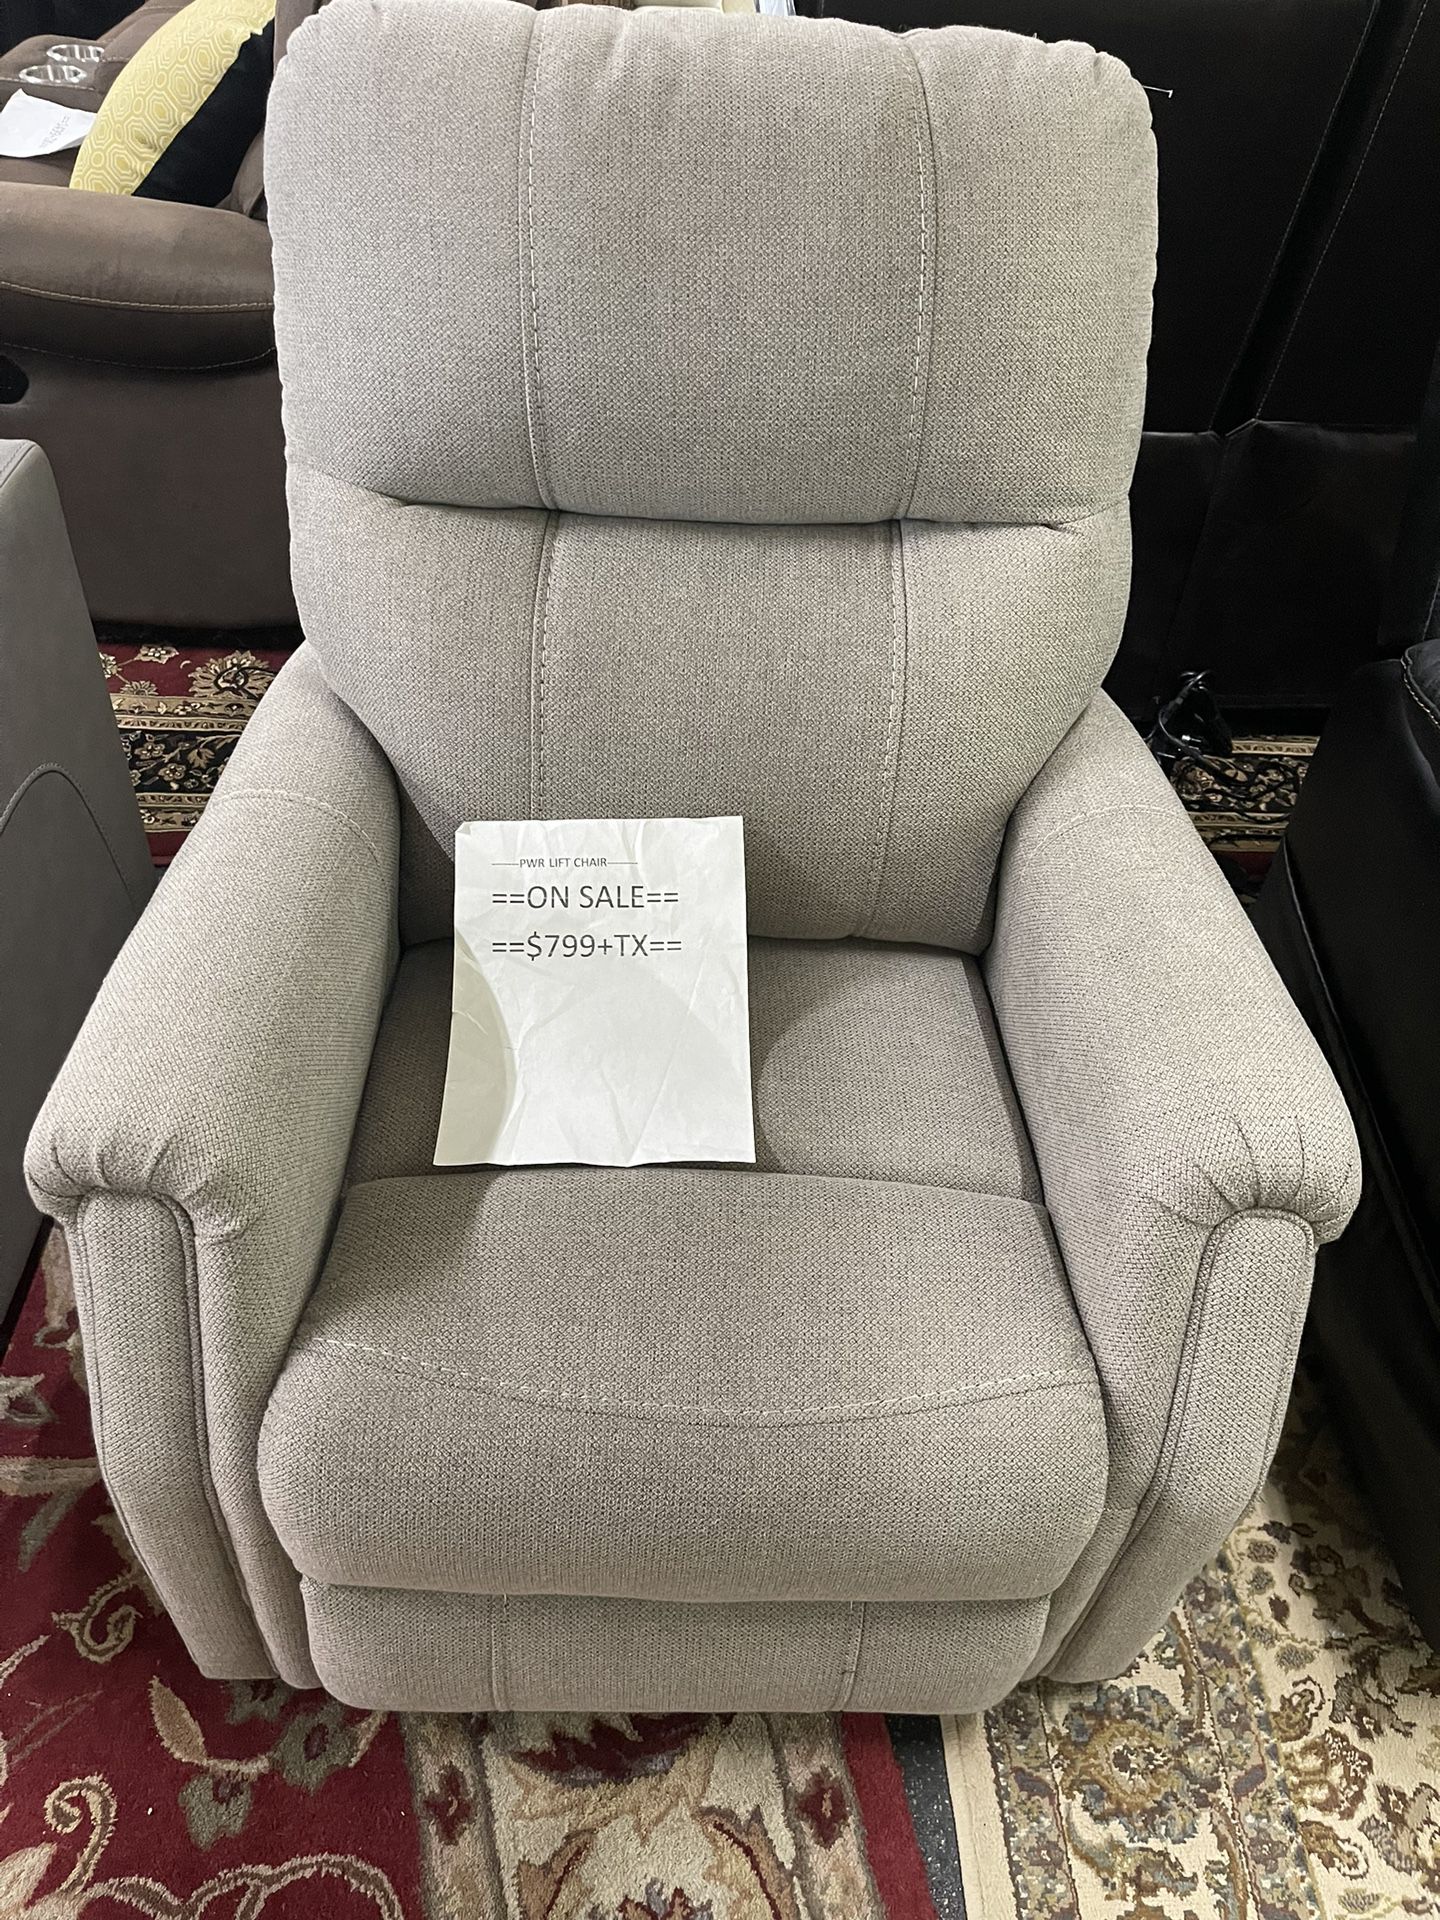 Power Reclining Lift Chair On Sale